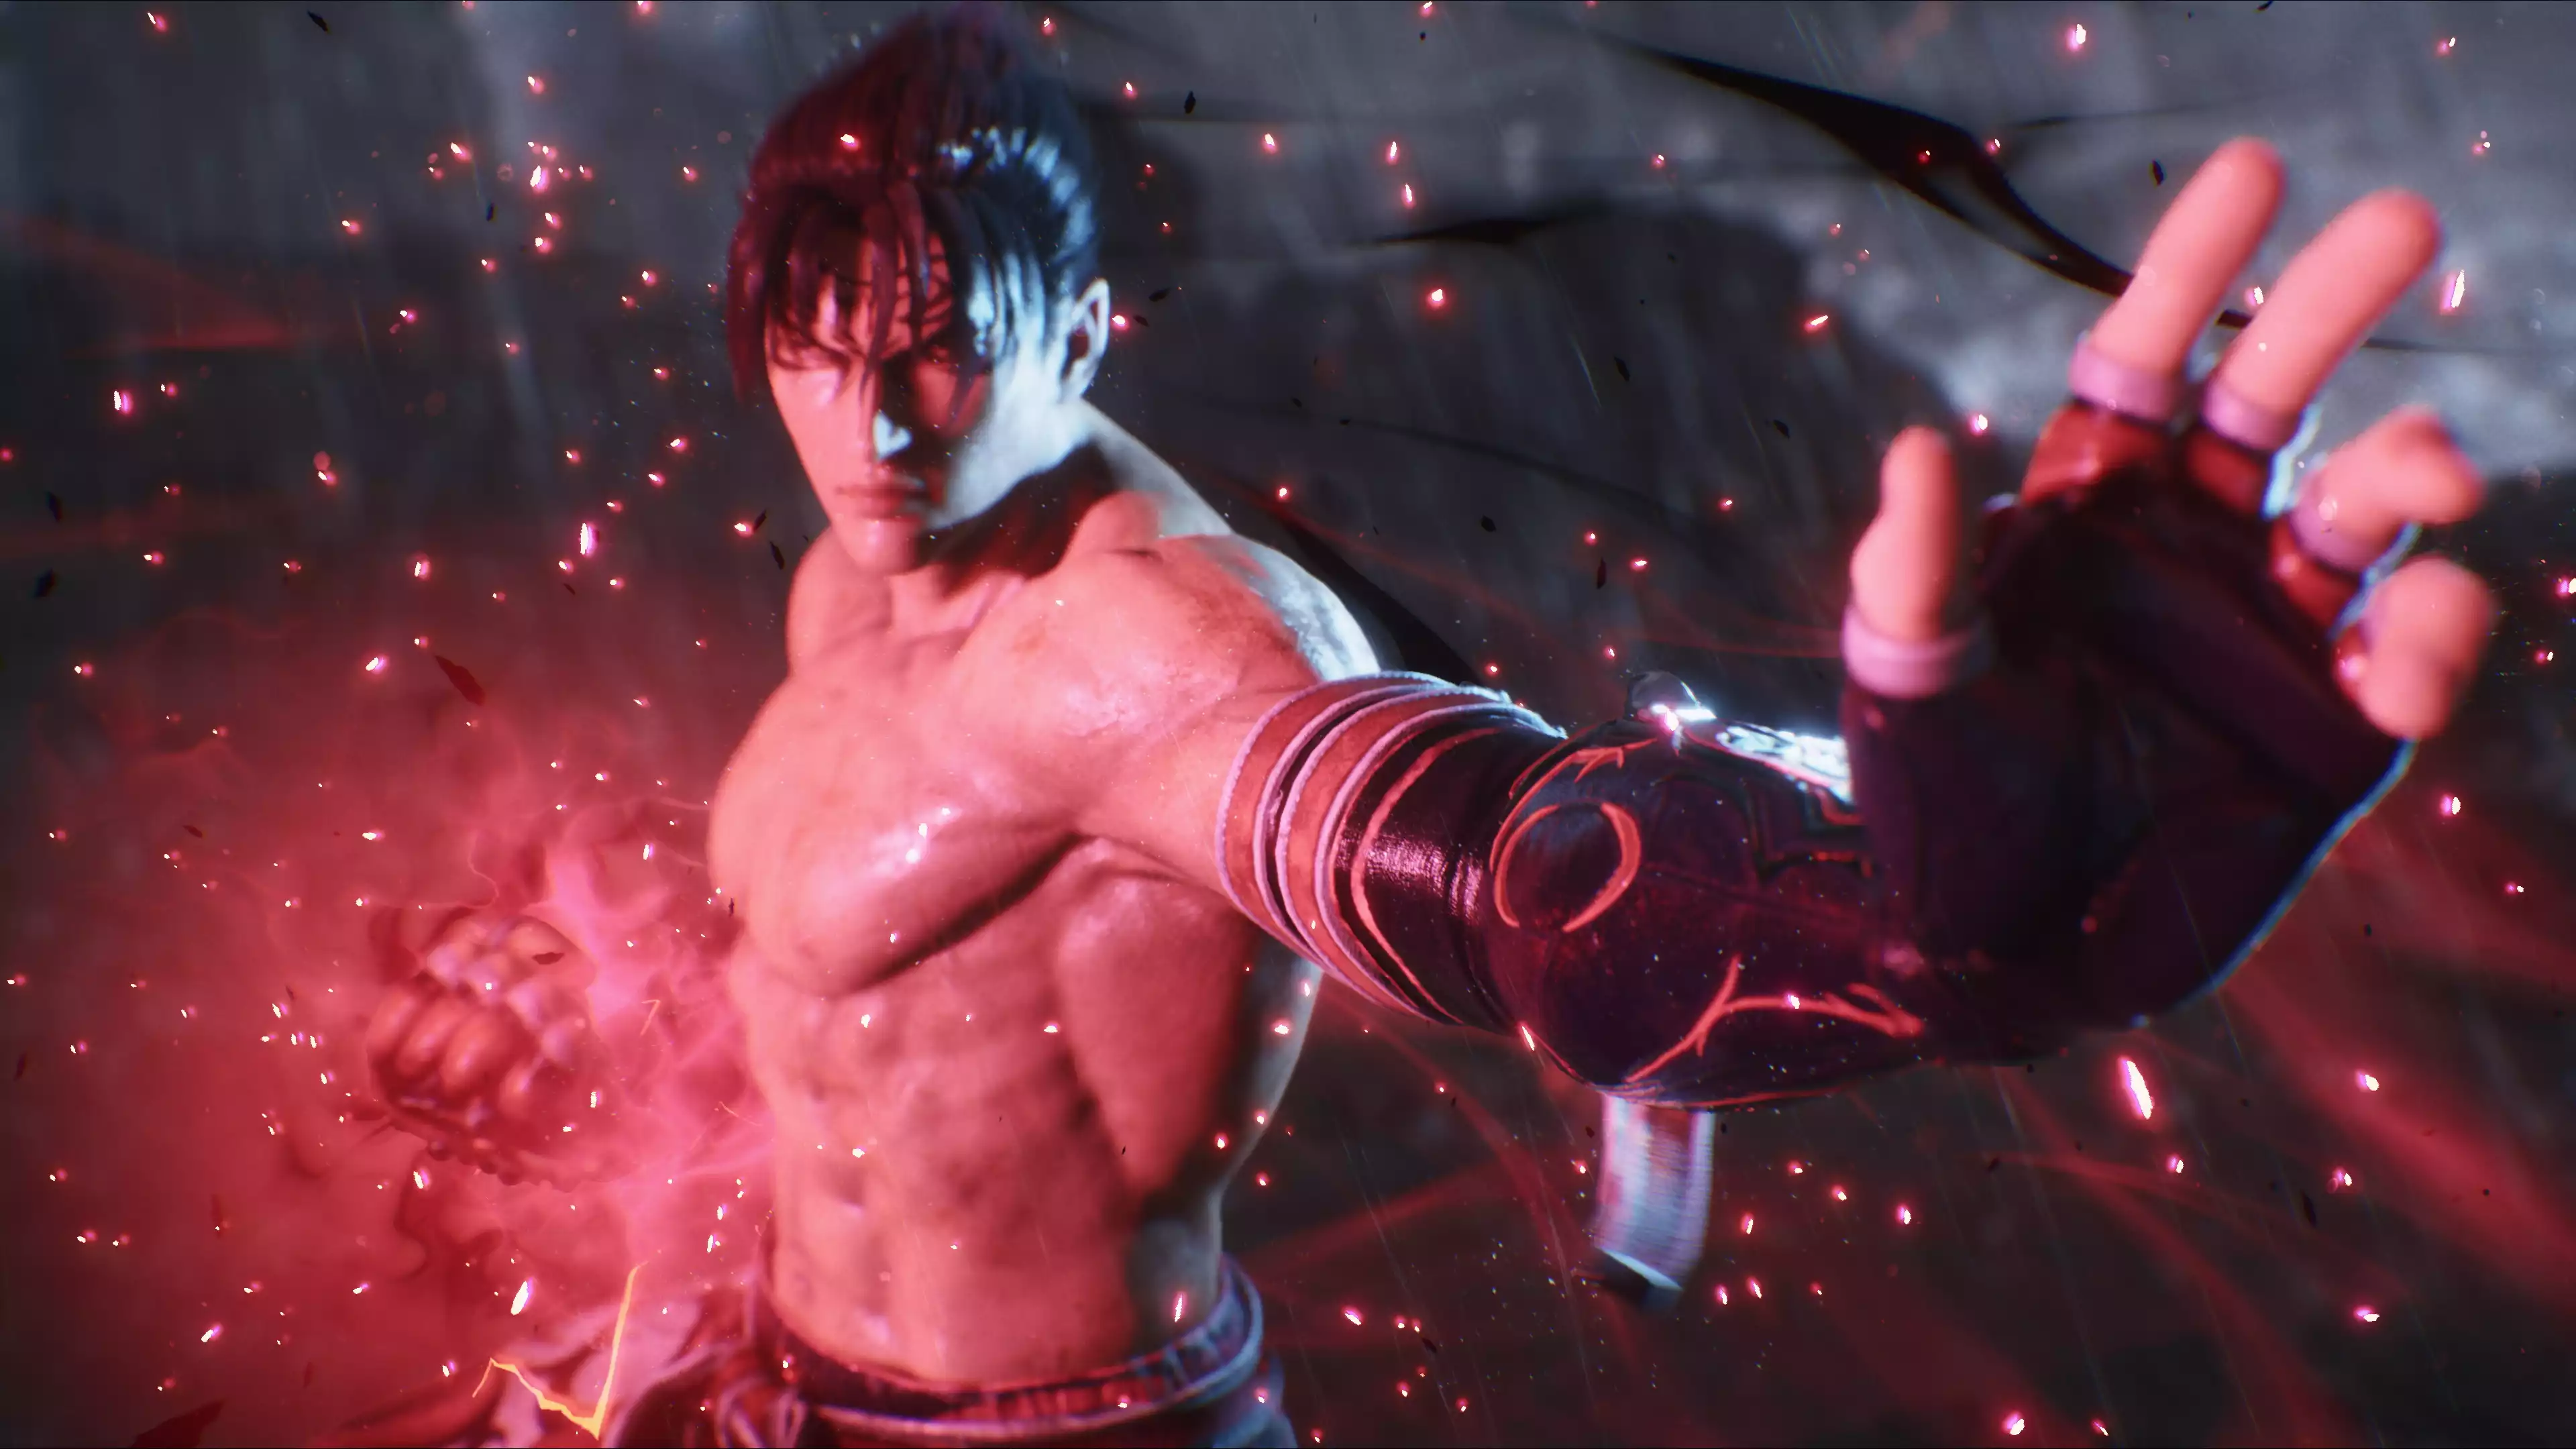 Tekken 8 has at least 6 more unannounced characters coming to the